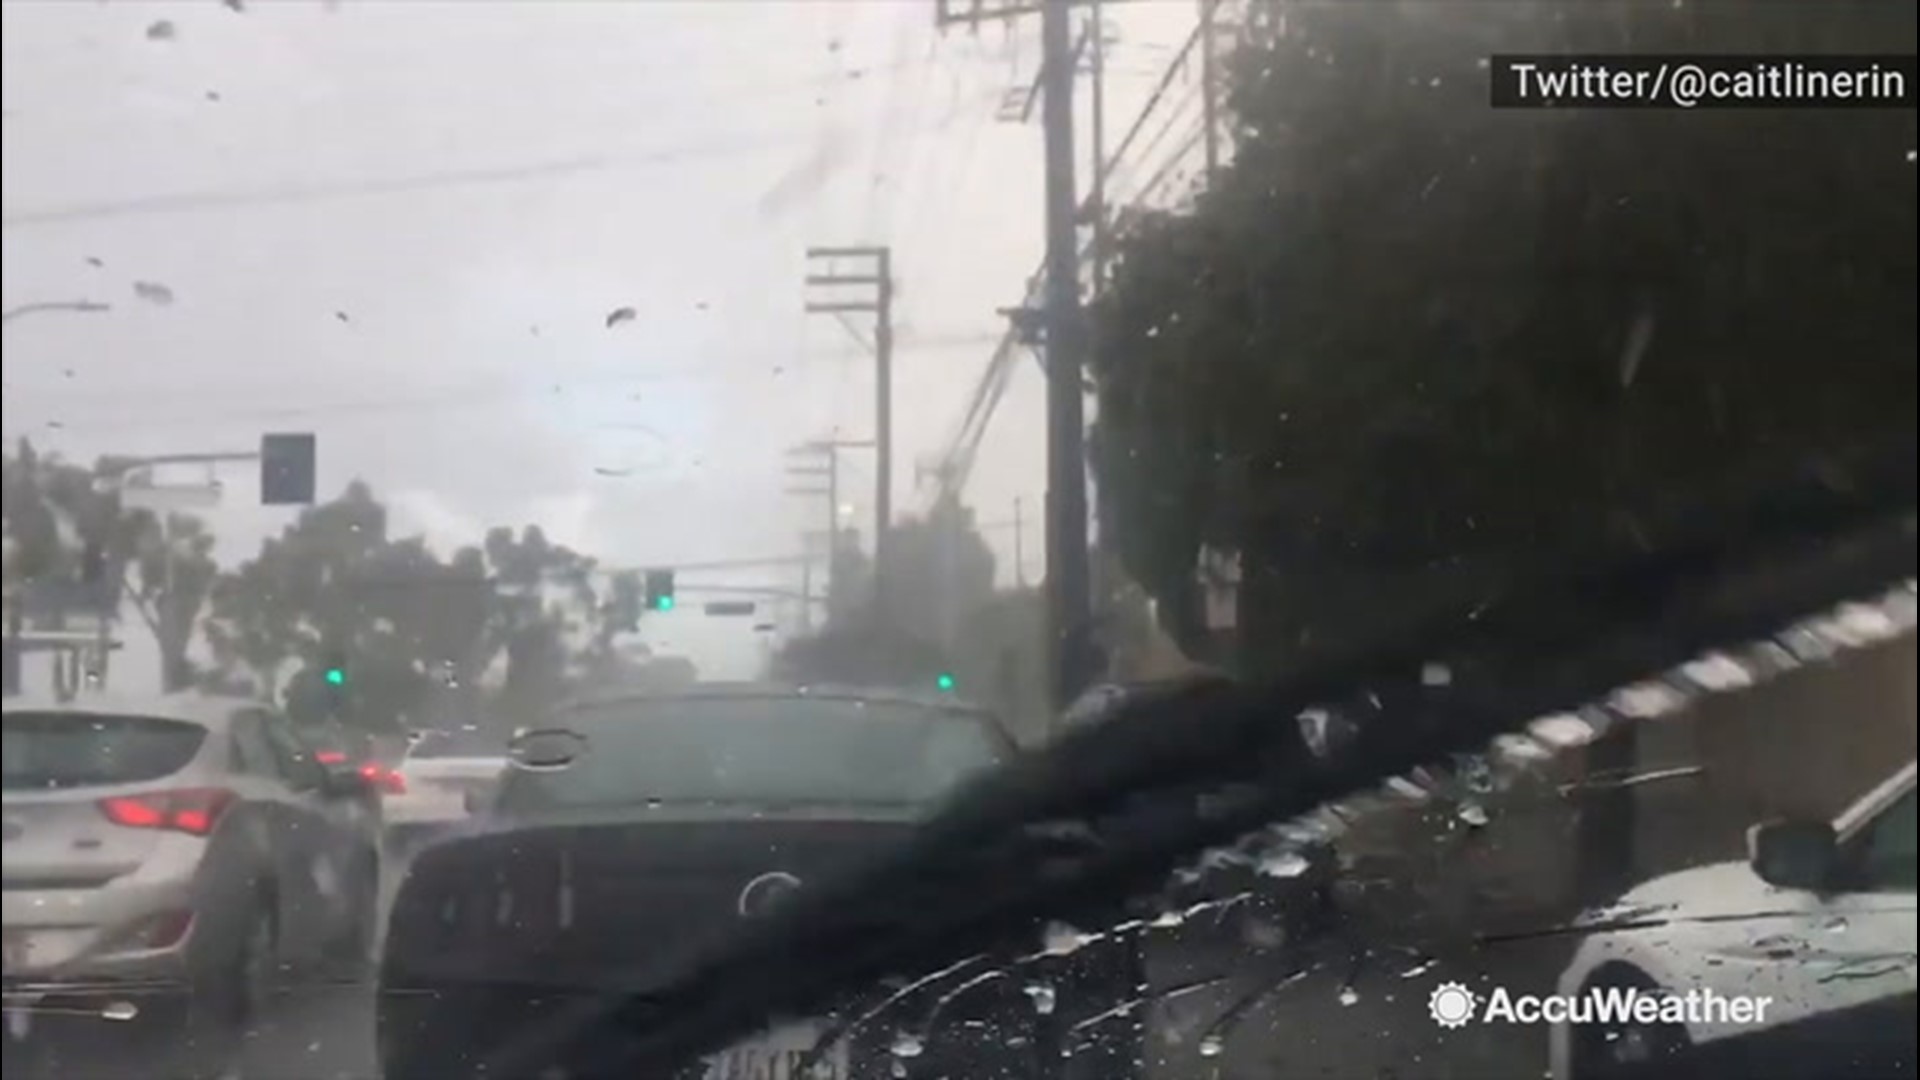 Thunderstorms brought rain and some hail into Southern California, which peppered these cars stuck at a traffic light in Los Angeles on Nov. 20.